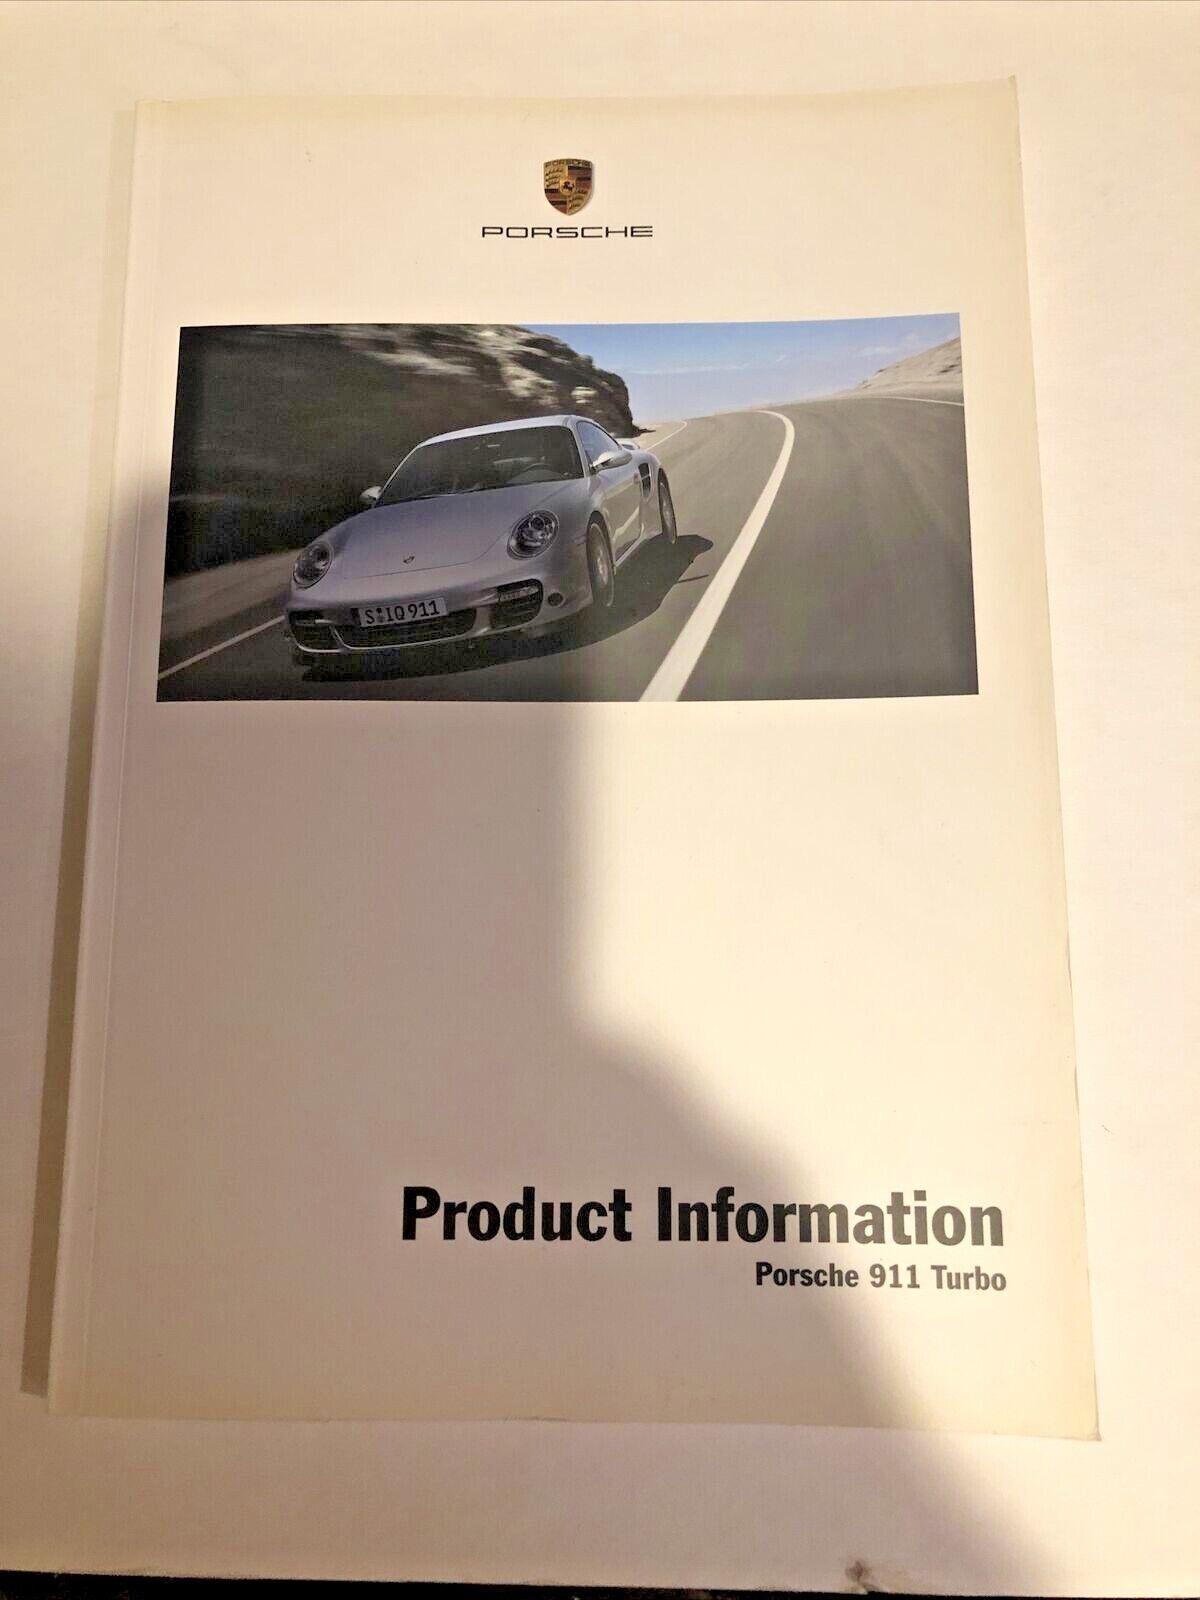 RARE.  Porsche Product information 2006 911 turbo 90 pages full spec information